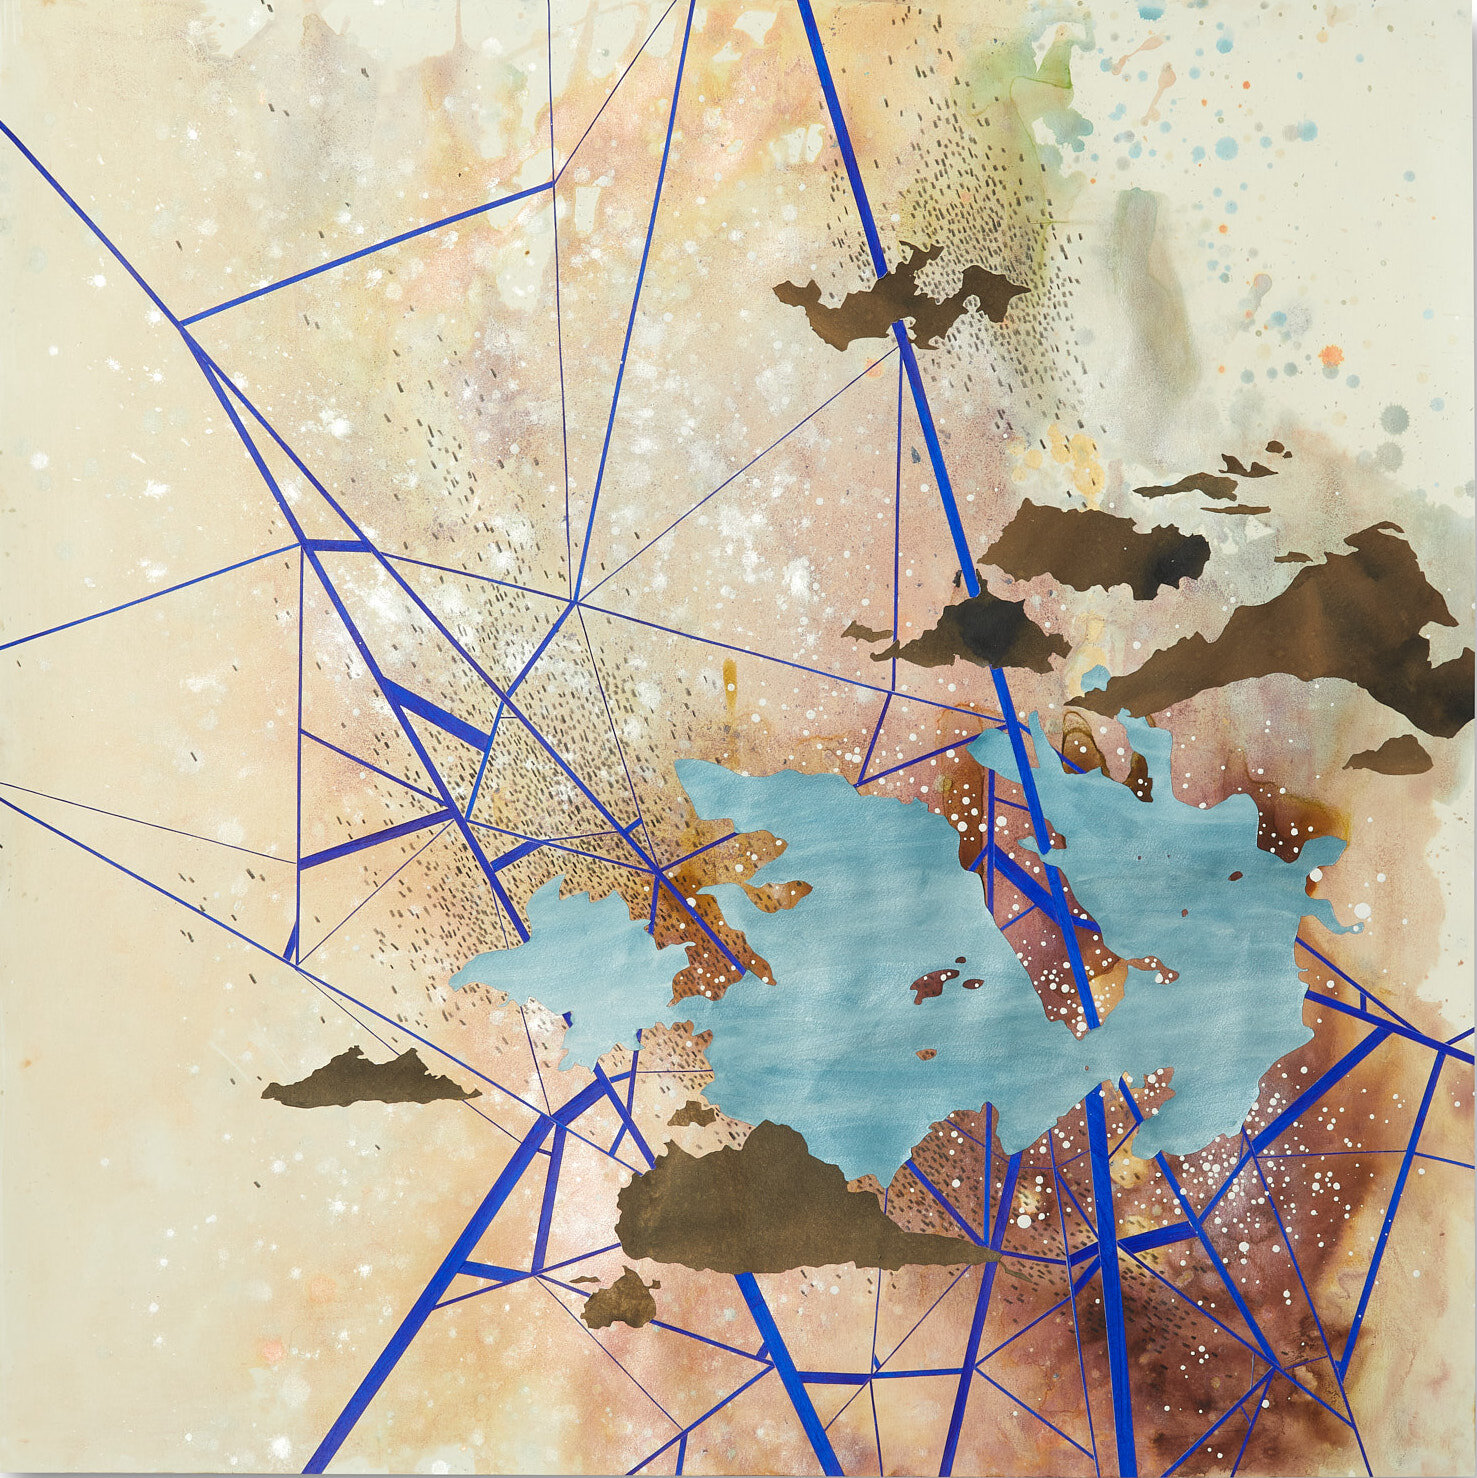  Val Britton,  Reverberation #70 , 2021, acrylic, ink, graphite and collage on paper, 36 x 36 inches (91.4 x 91.4 cm)  